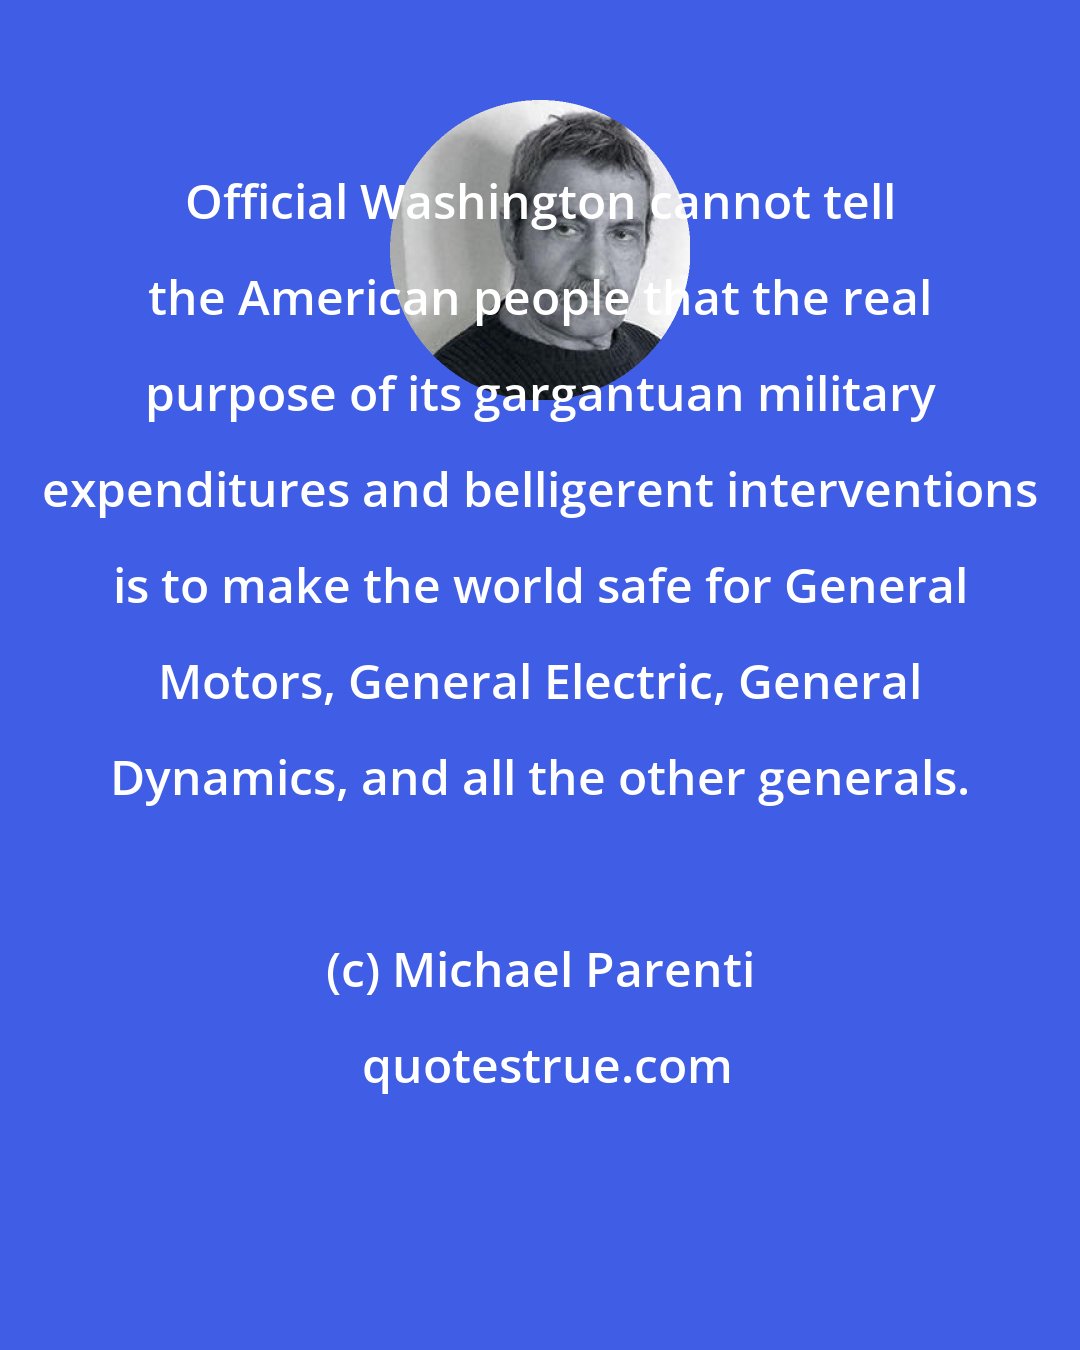 Michael Parenti: Official Washington cannot tell the American people that the real purpose of its gargantuan military expenditures and belligerent interventions is to make the world safe for General Motors, General Electric, General Dynamics, and all the other generals.